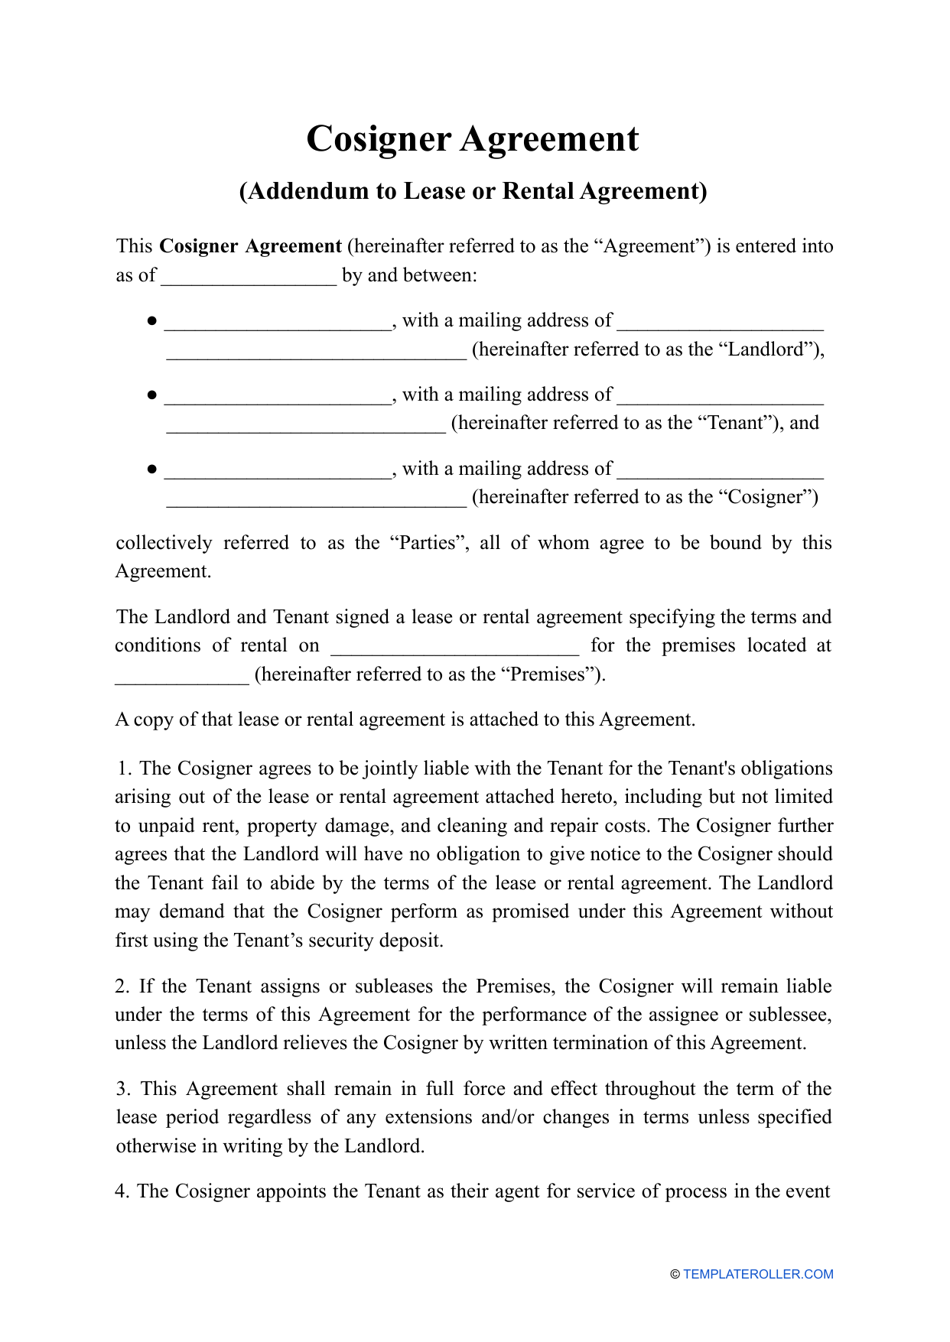 Cosigner Agreement Template, Page 1